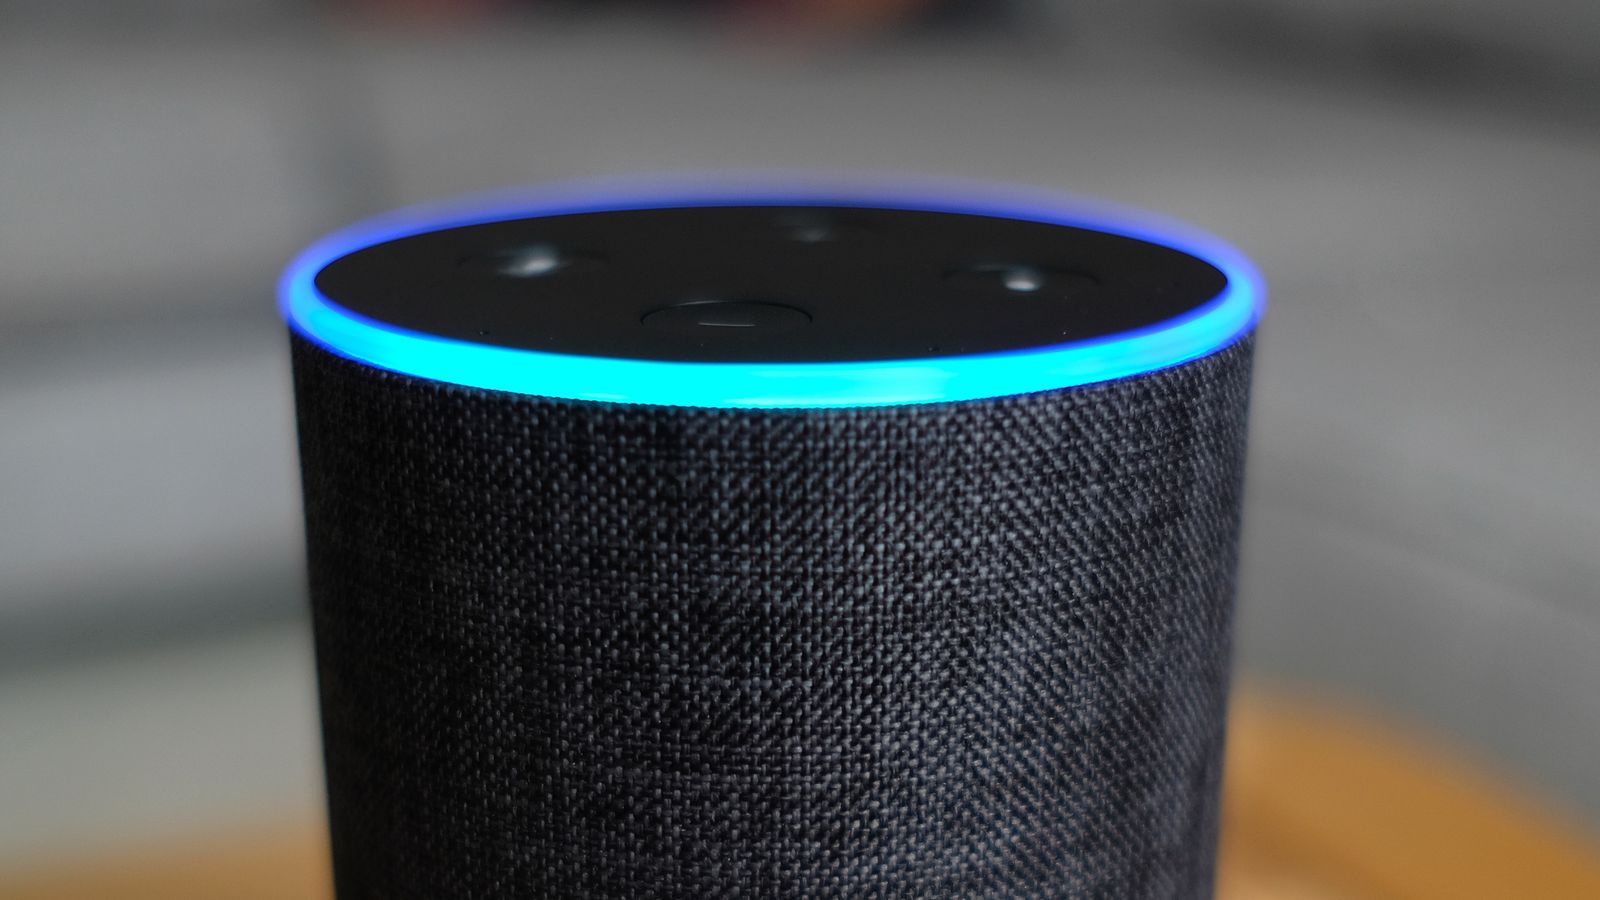 'Chilling' surge in use of smart speakers and baby monitors to carry out domestic abuse, MPs say